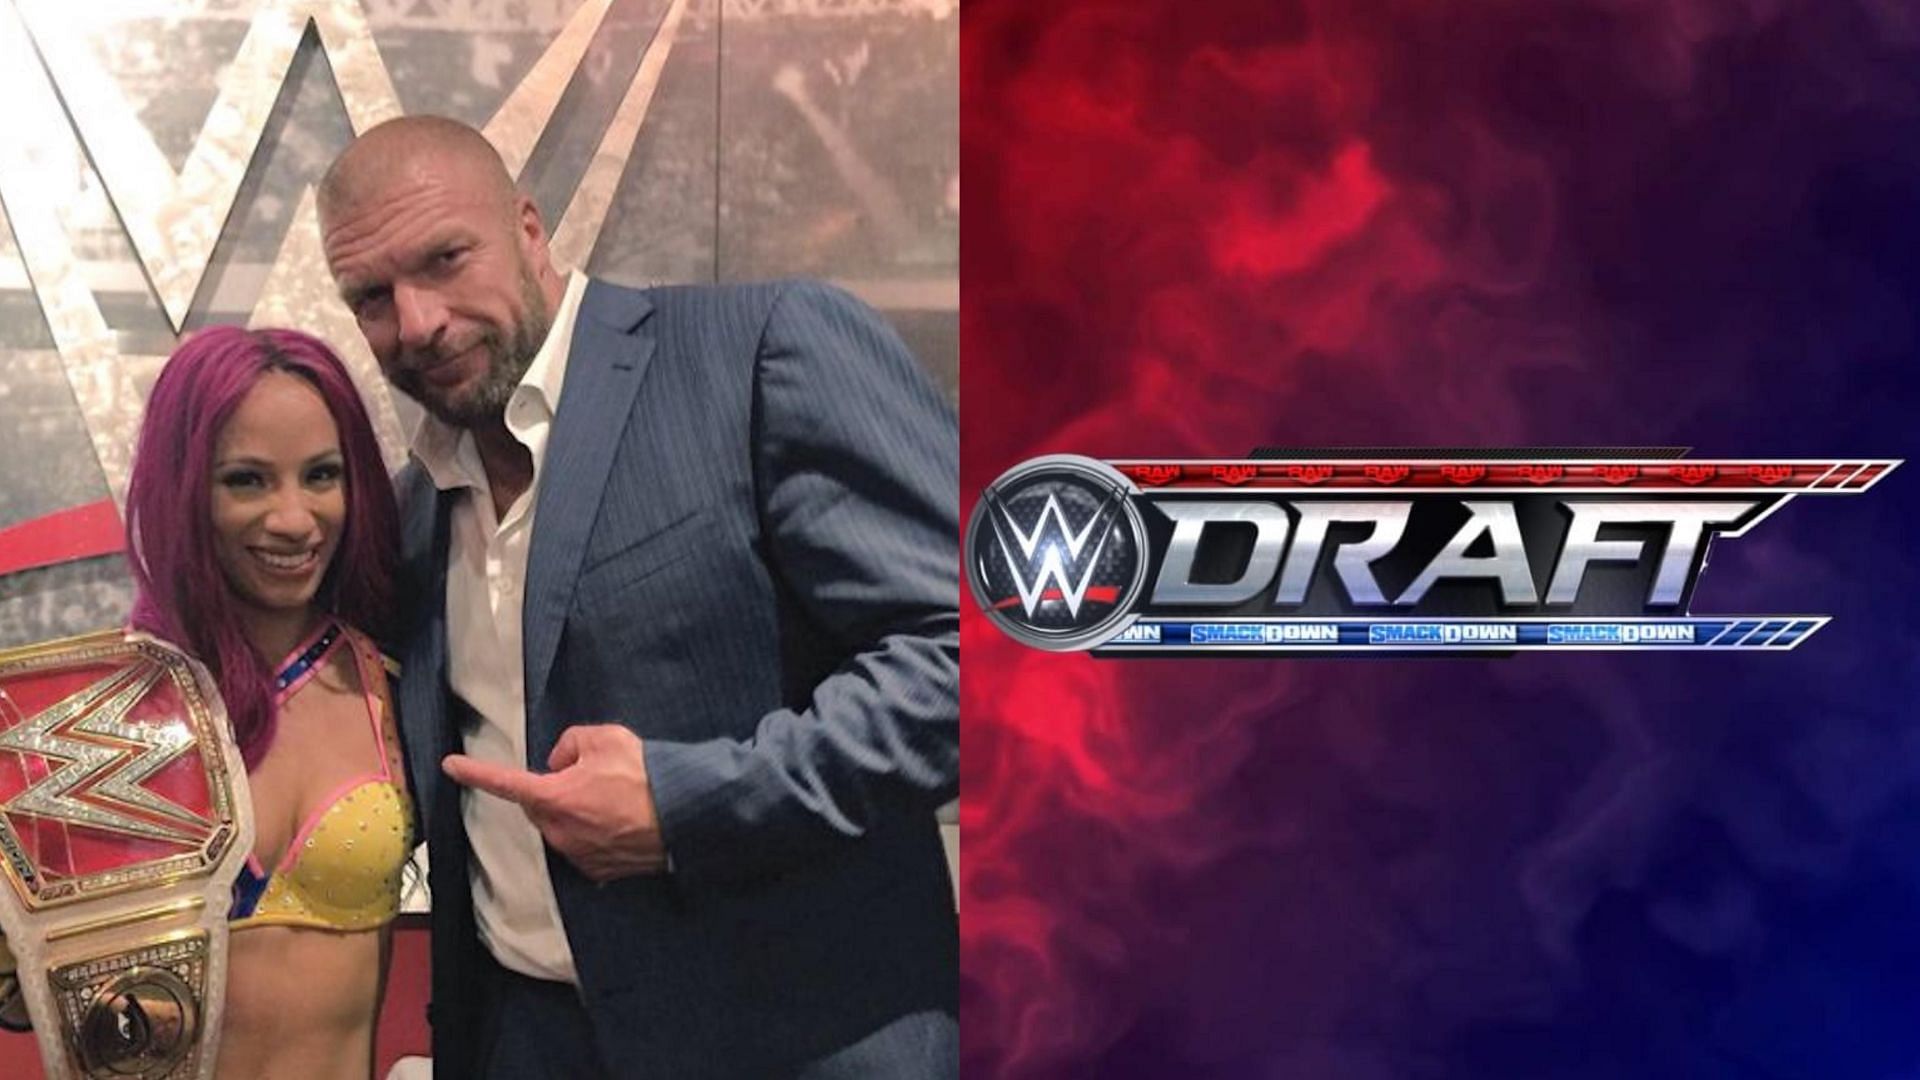 The WWE Draft begins this Friday on SmackDown.